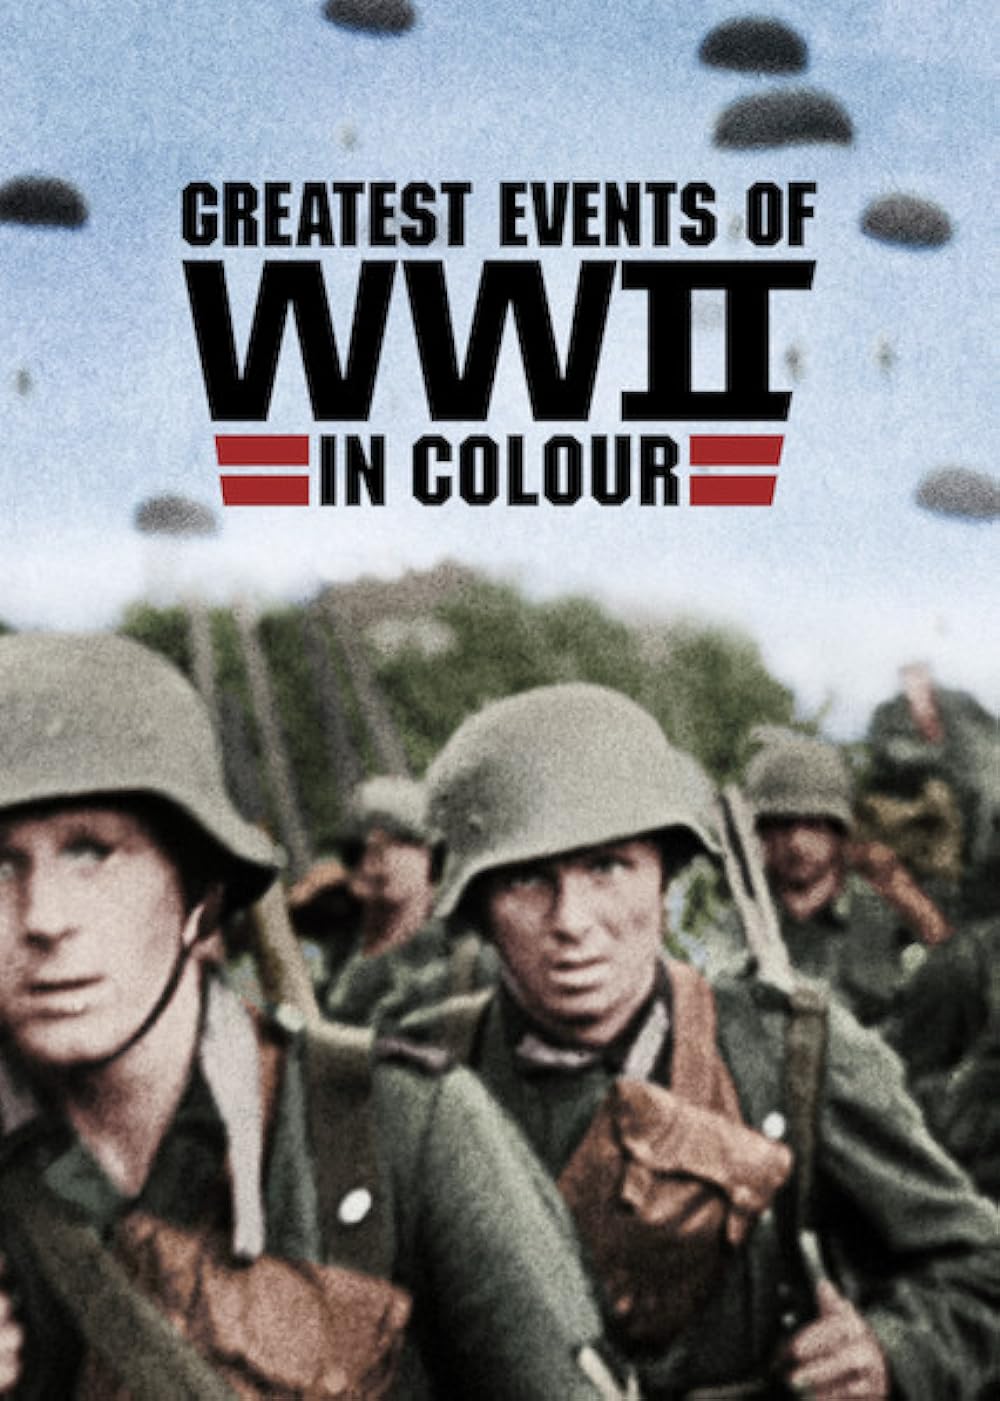 Greatest Events of WWII in Colour (2019) S1 EP6 D-Day 128Kbps 25Fps 48Khz 2.0Ch DD+ NF E-AC3 Turkish Audio TAC